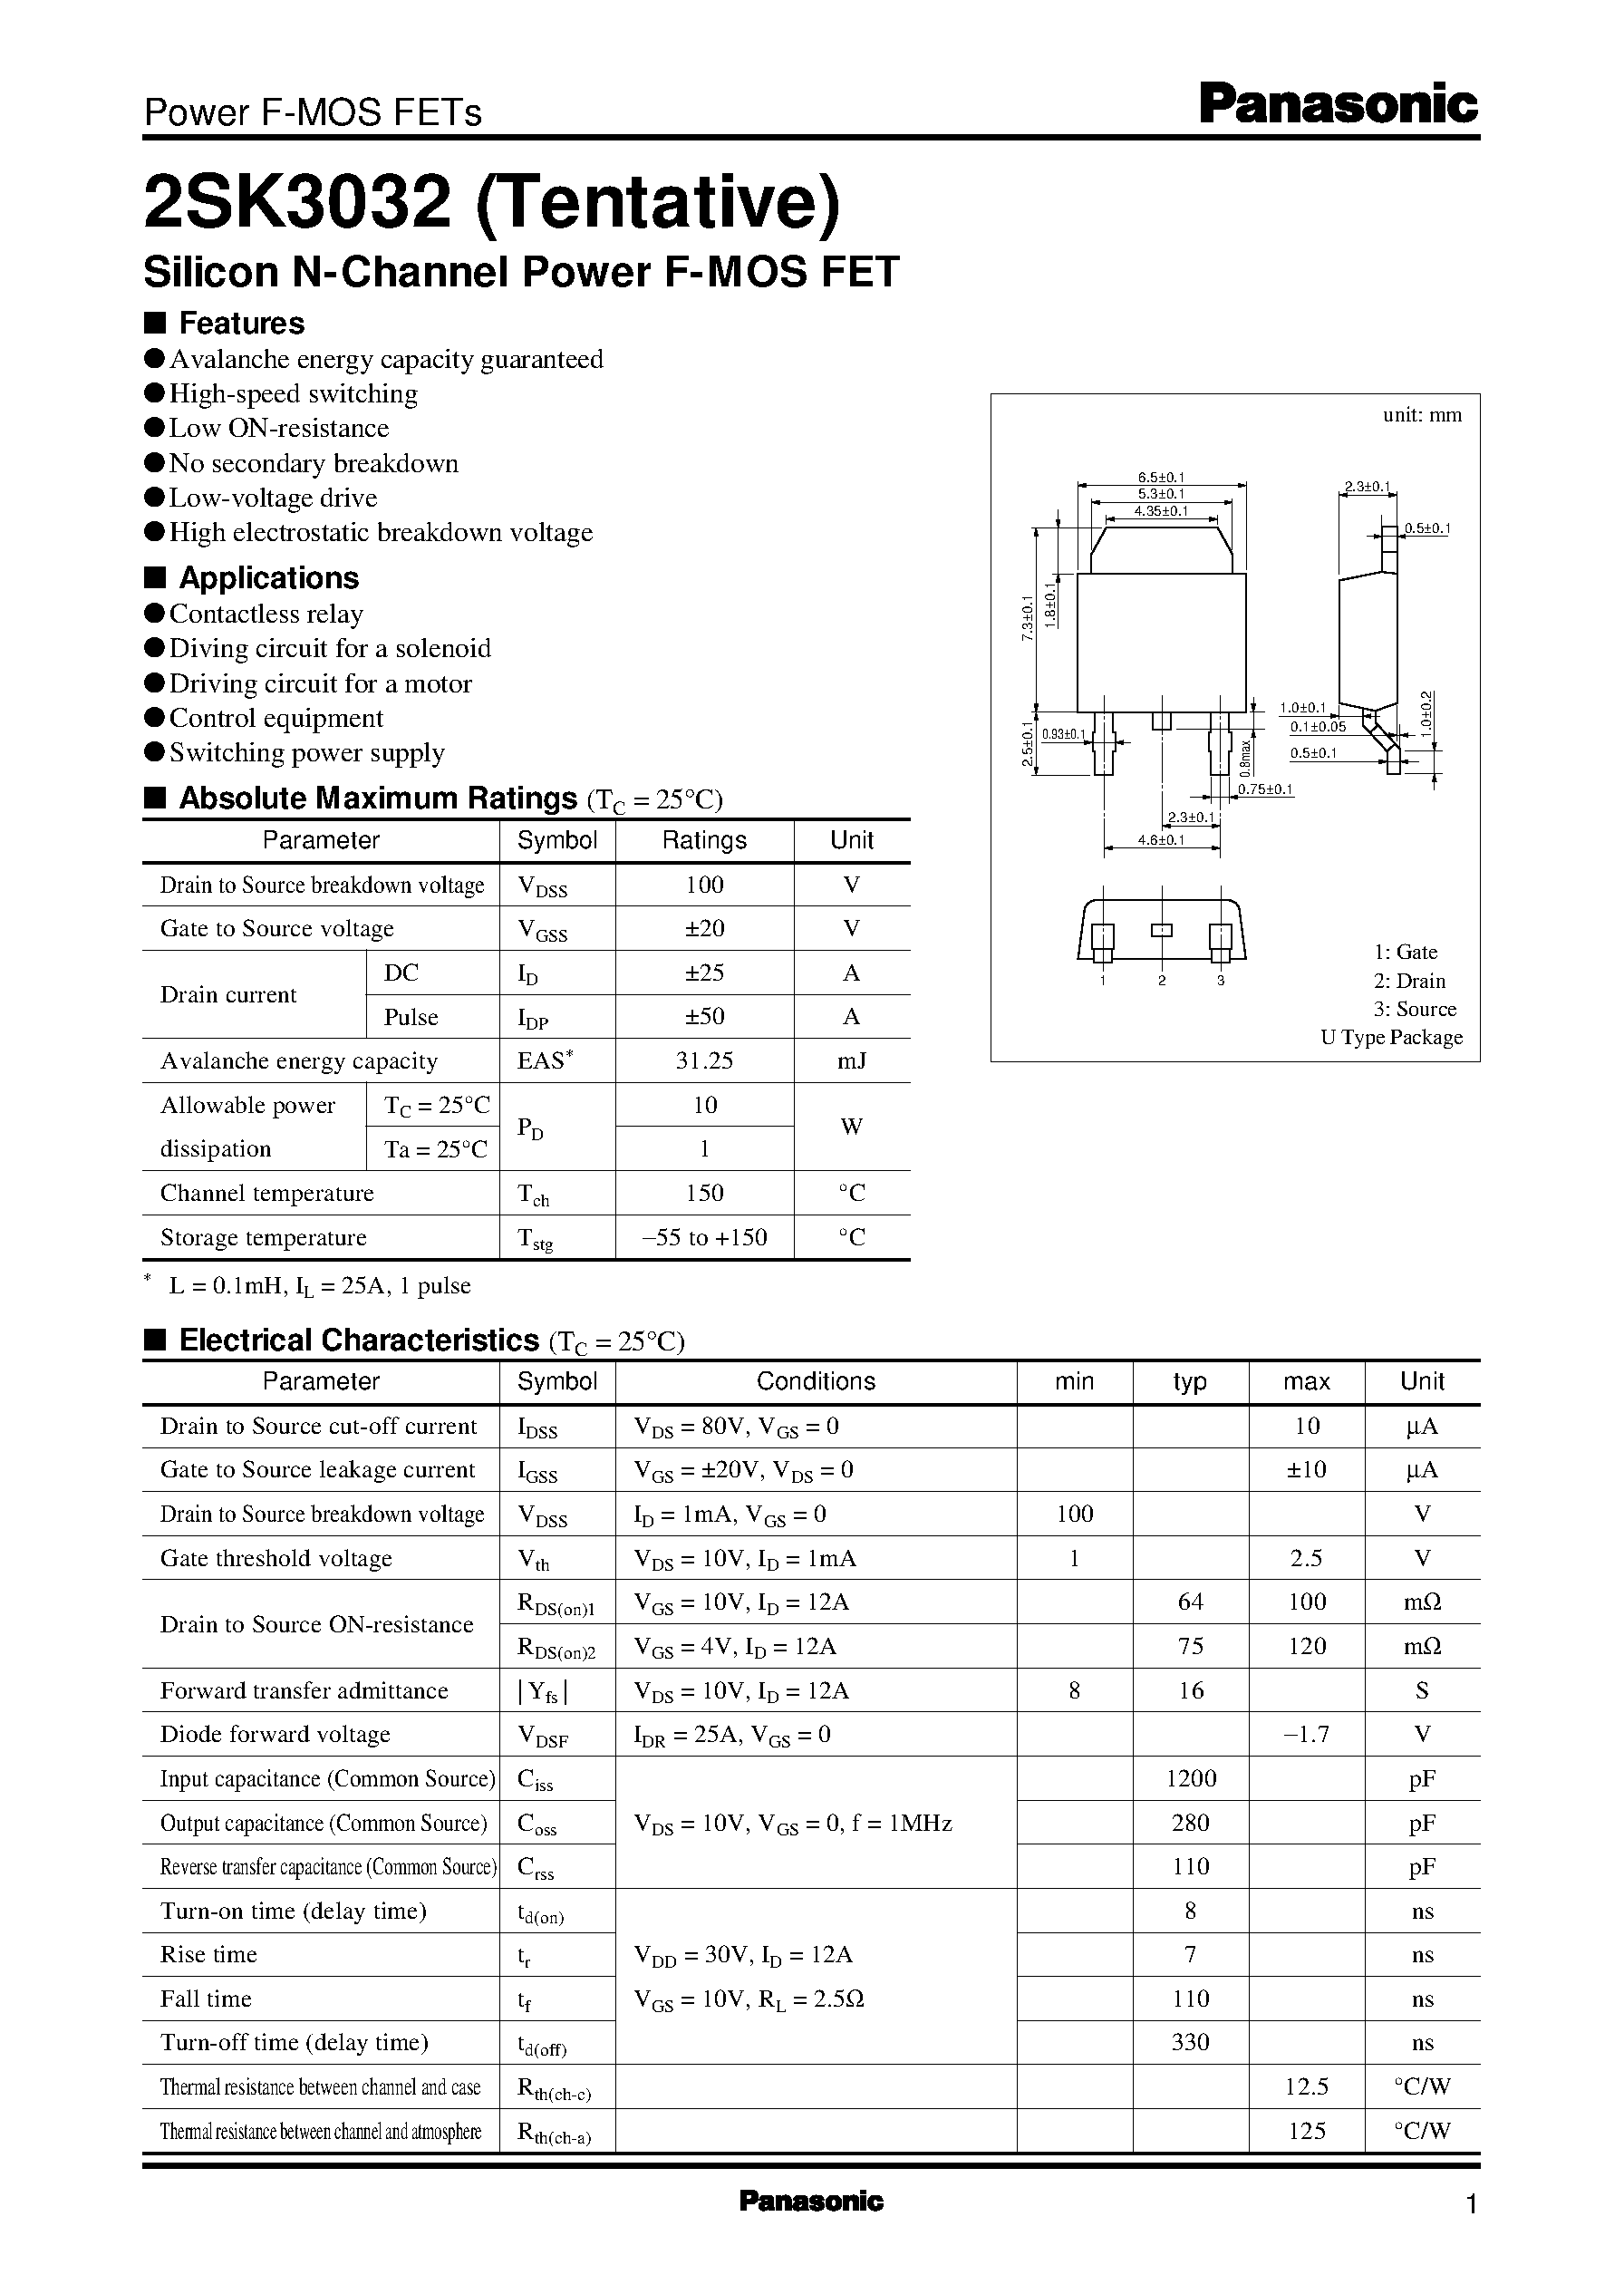 Datasheet 2SK3032 - Silicon N-Channel Power F-MOS FET page 1